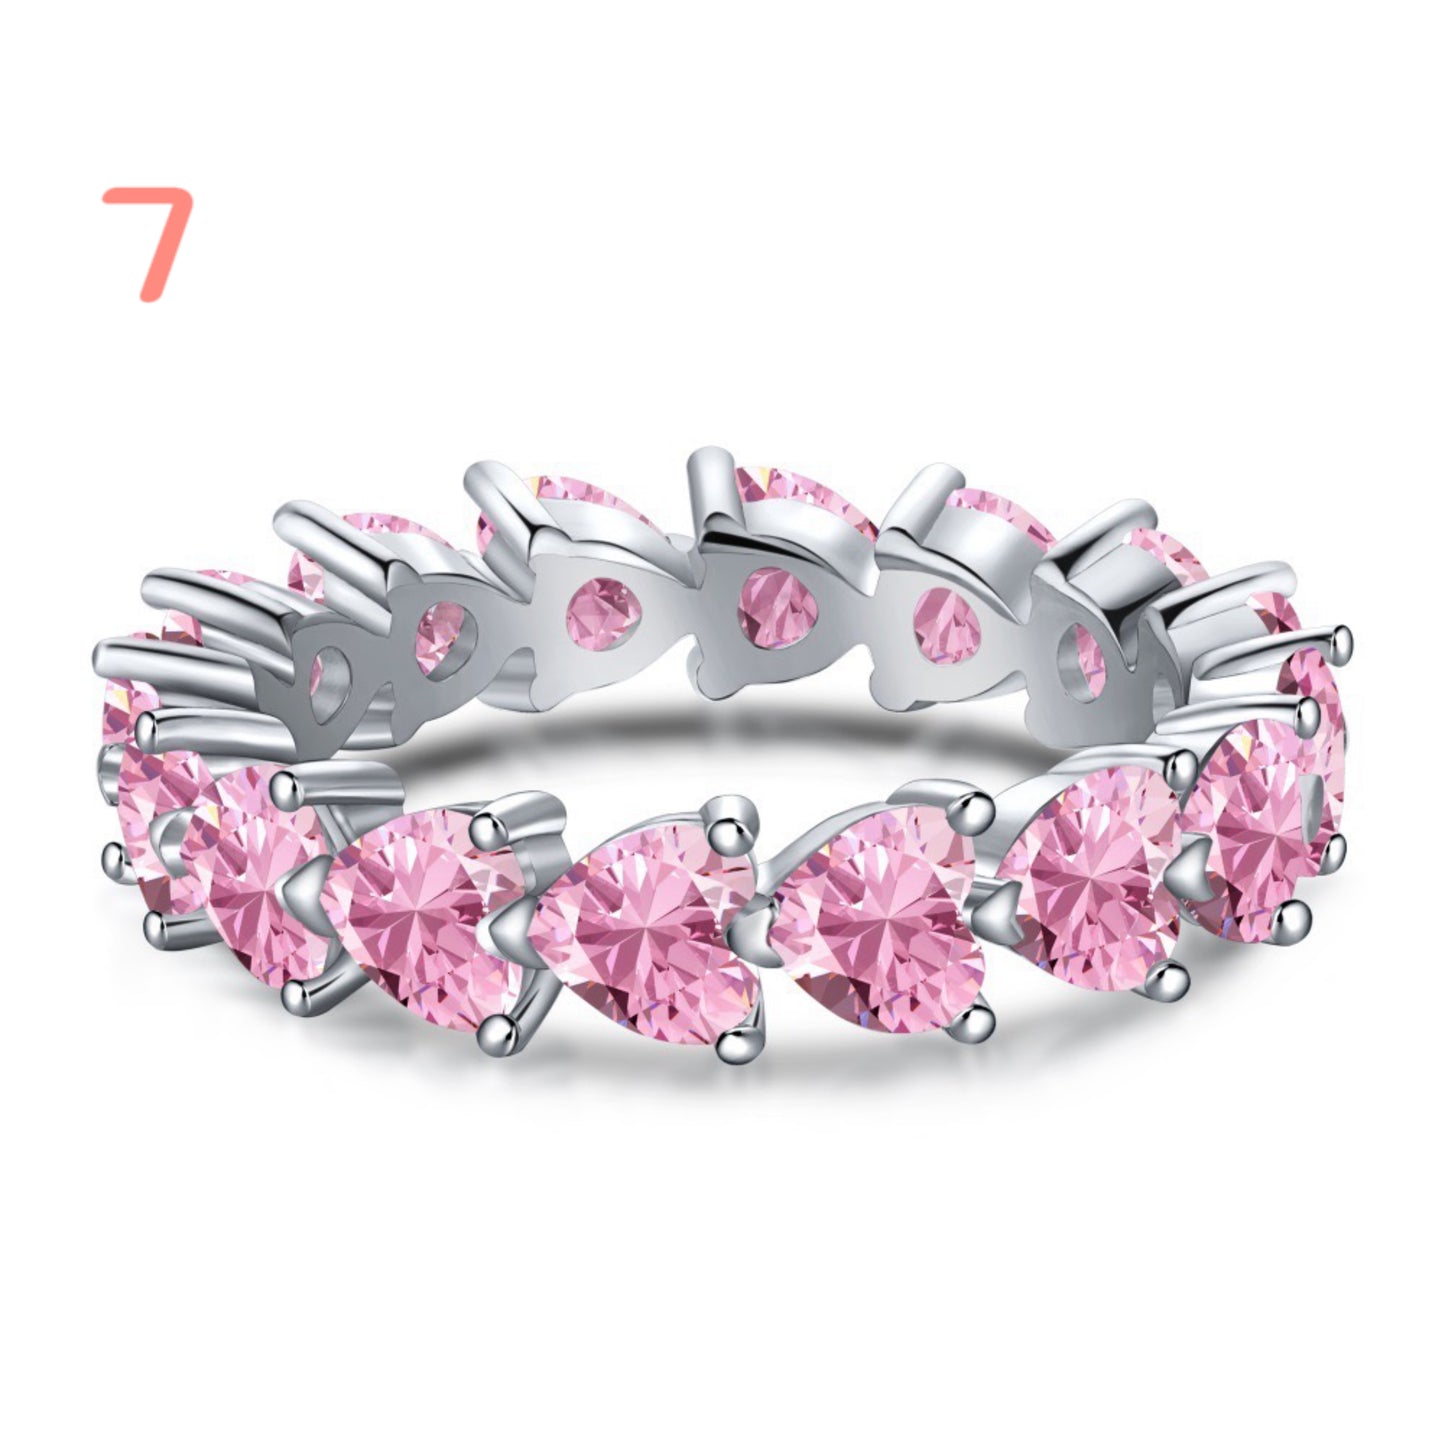 5A Pink Cubic Zirconia S925 Ring- Pink Diamond Collection